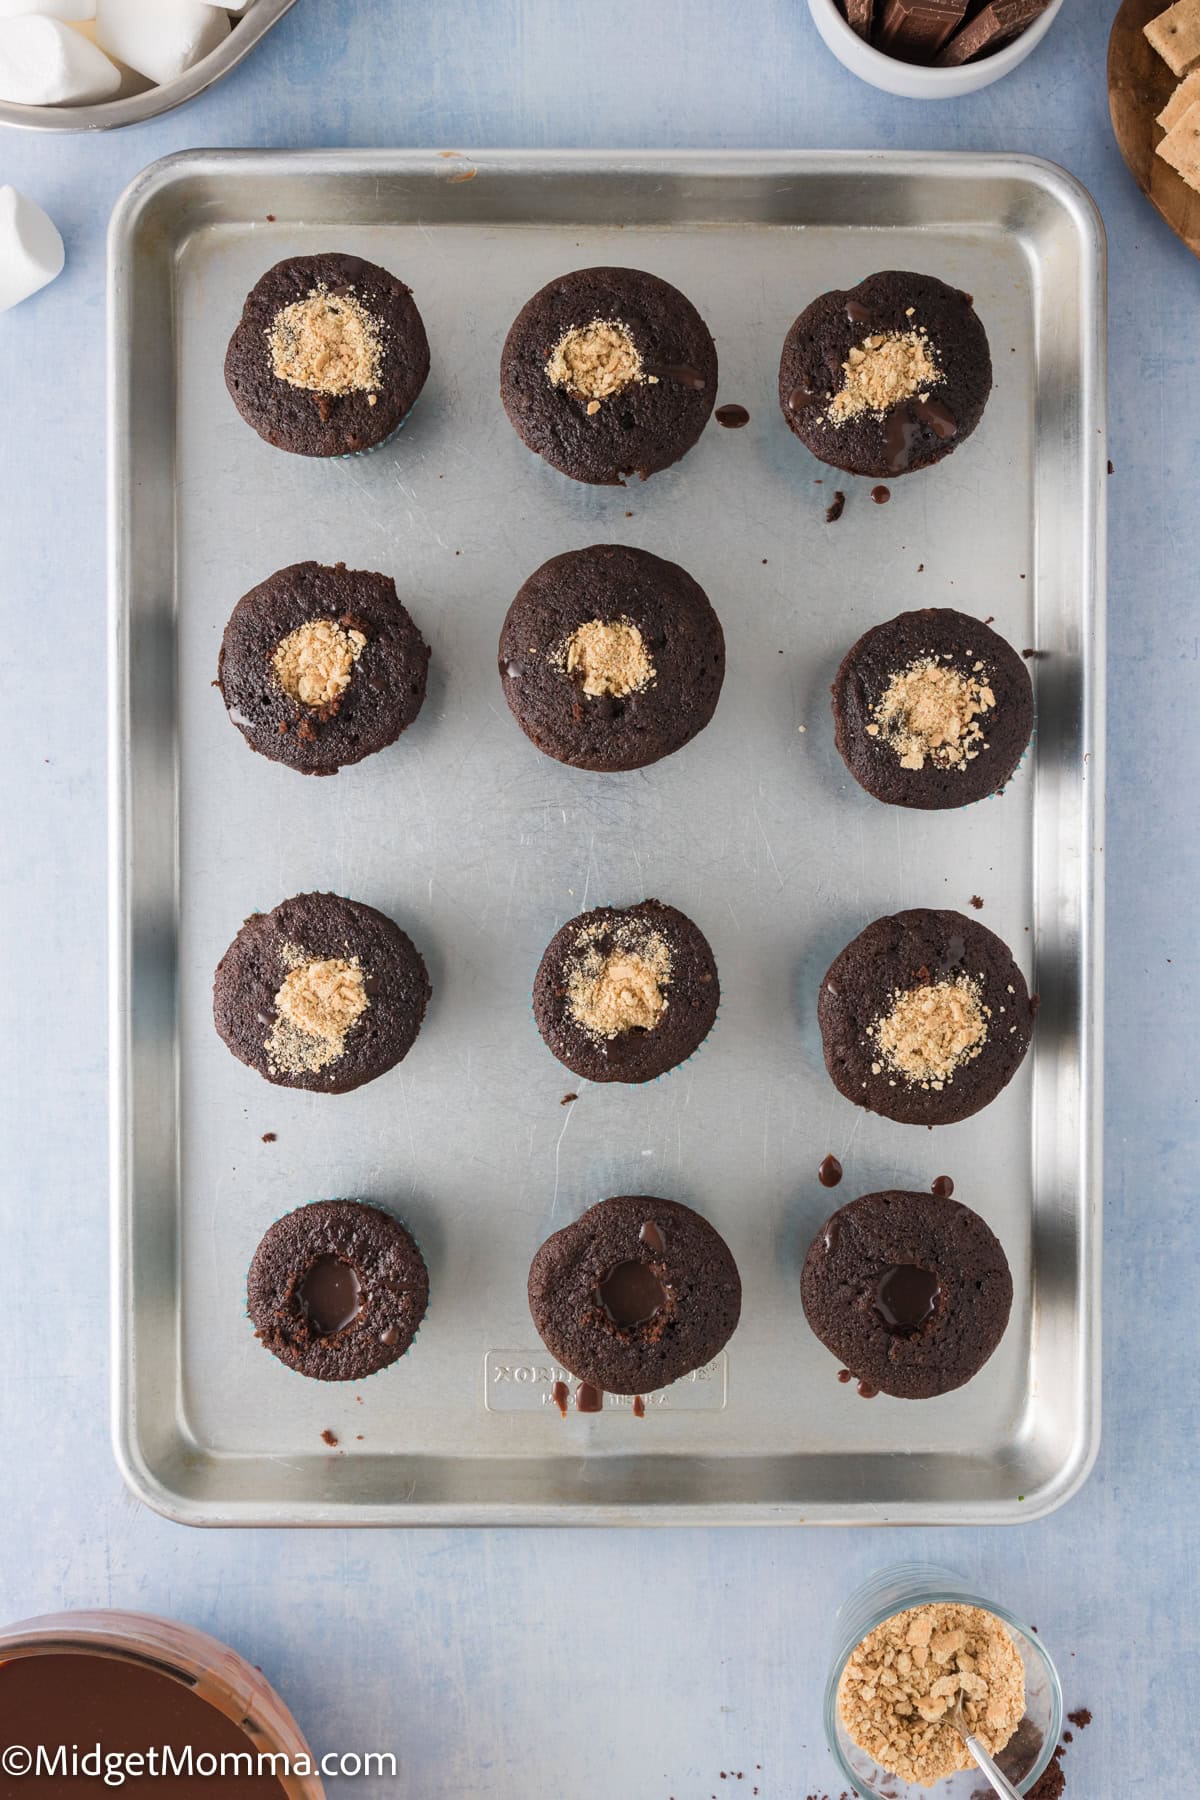 Baked chocolate cupcakes filled with chocolate ganache and graham crackers crumbs.